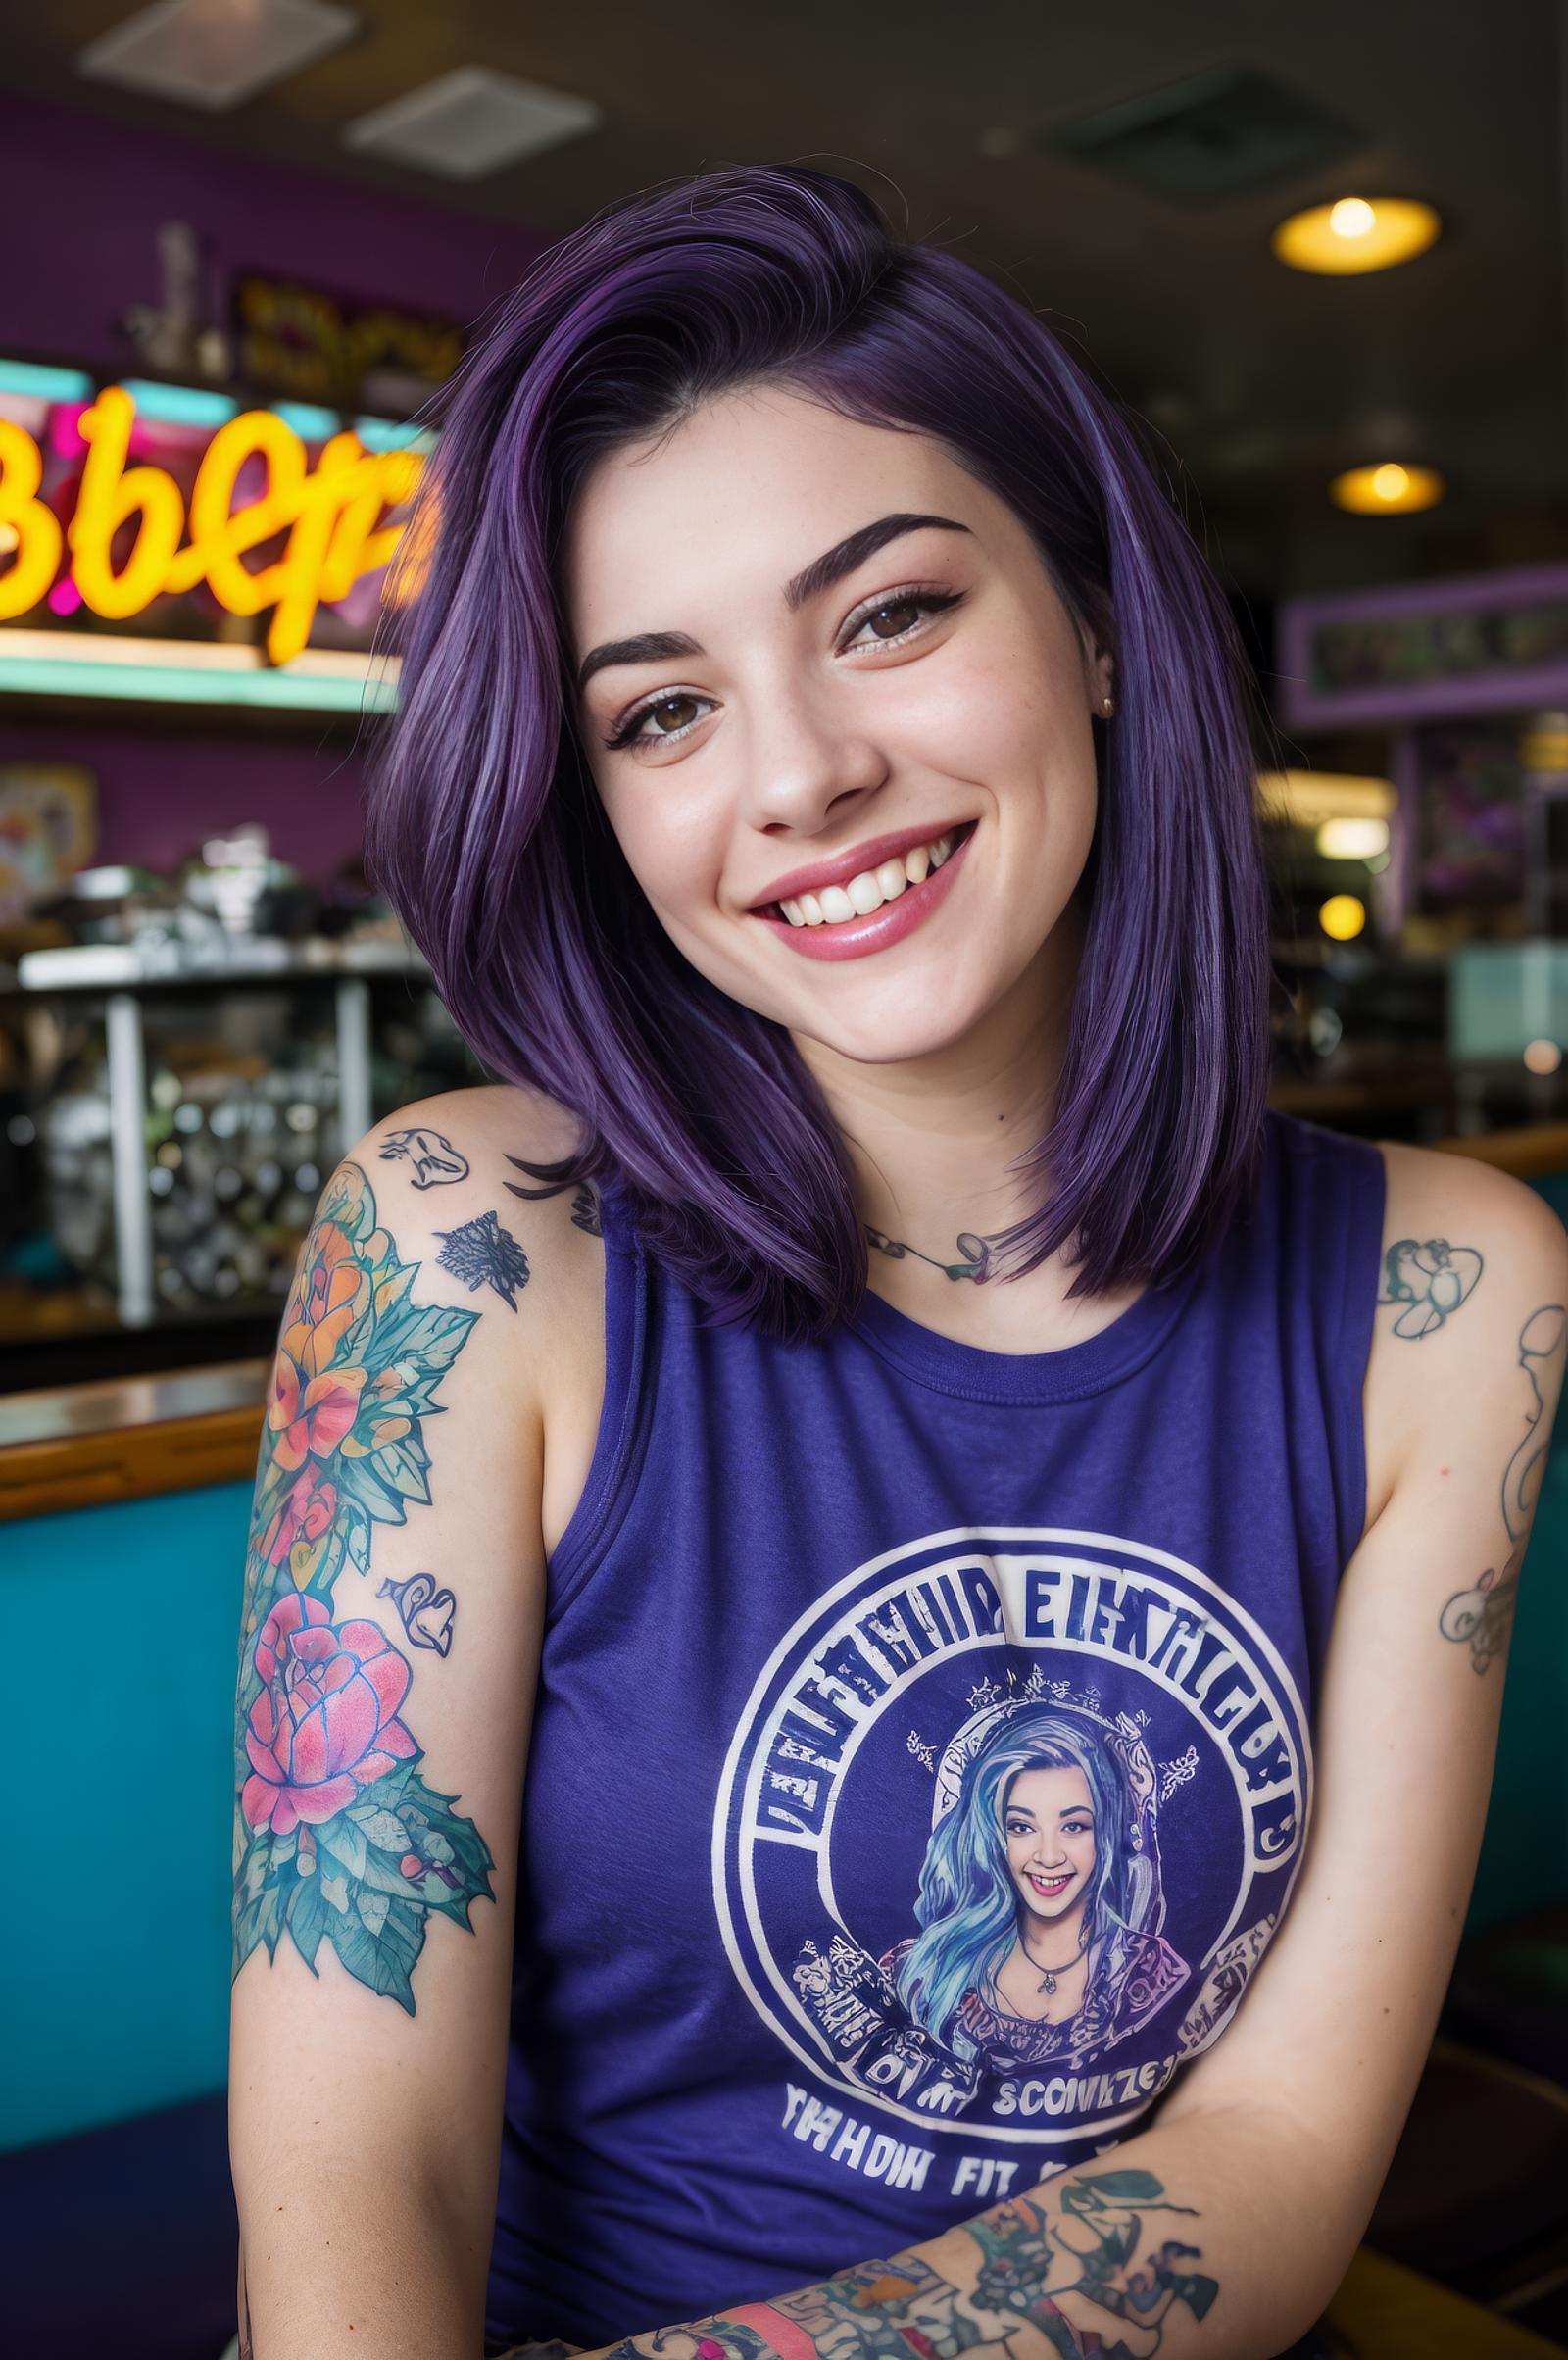 A young woman with purple hair and tattoos wearing a purple shirt.